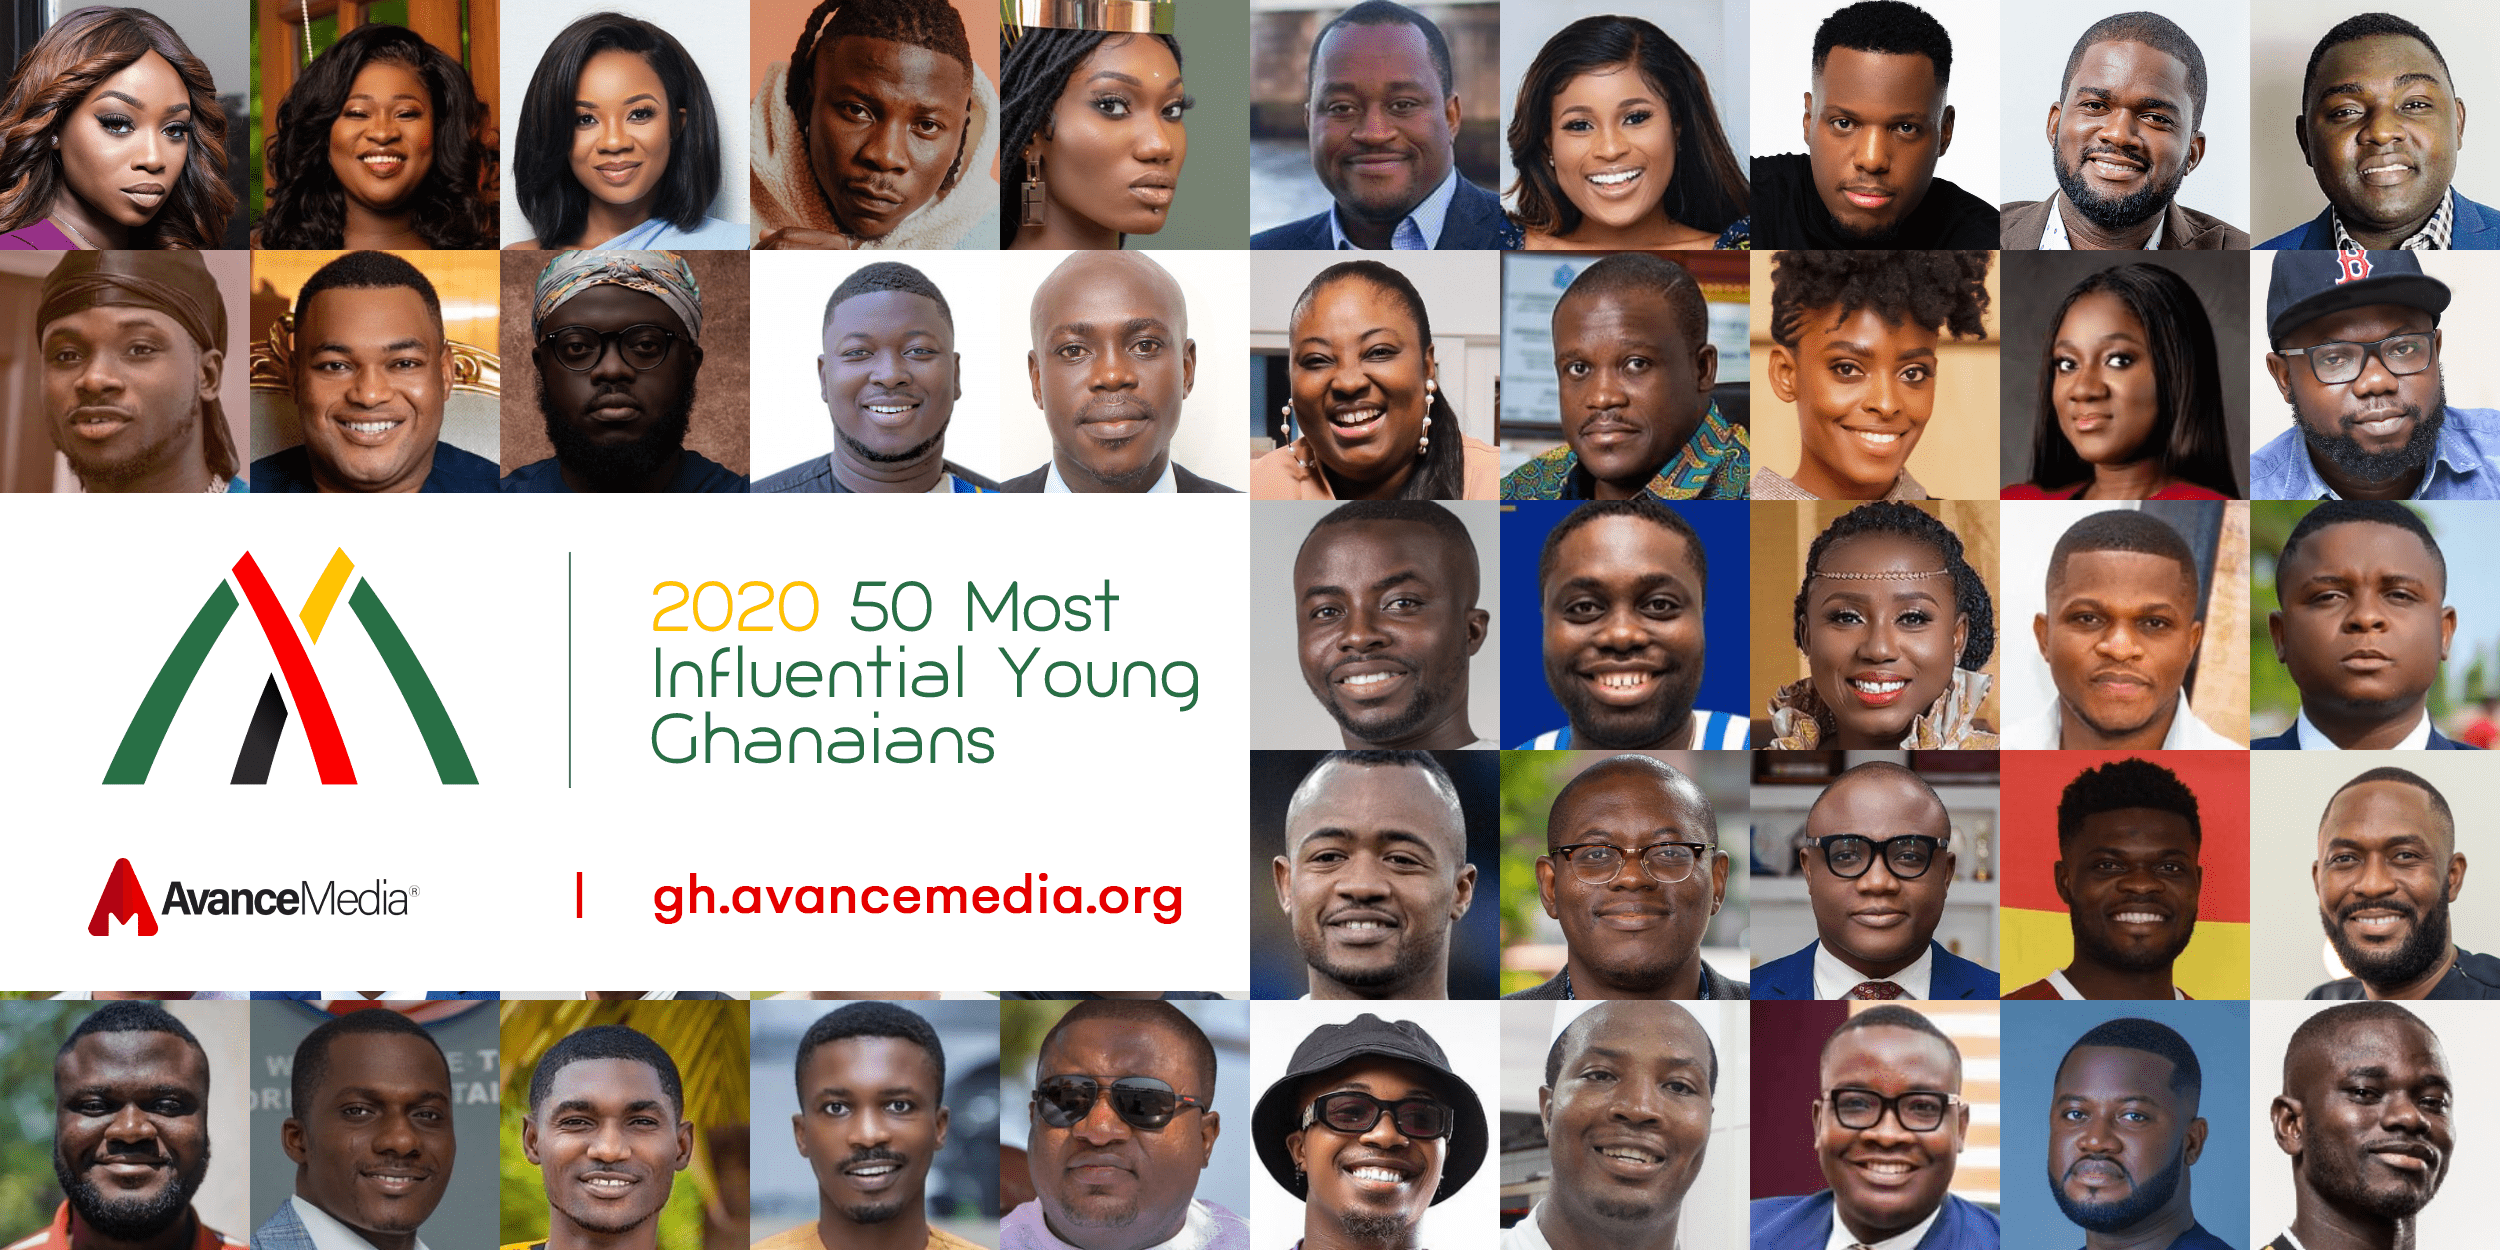 Here is the List of 50 Most Influential Young Ghanaians as announced by Avance Media